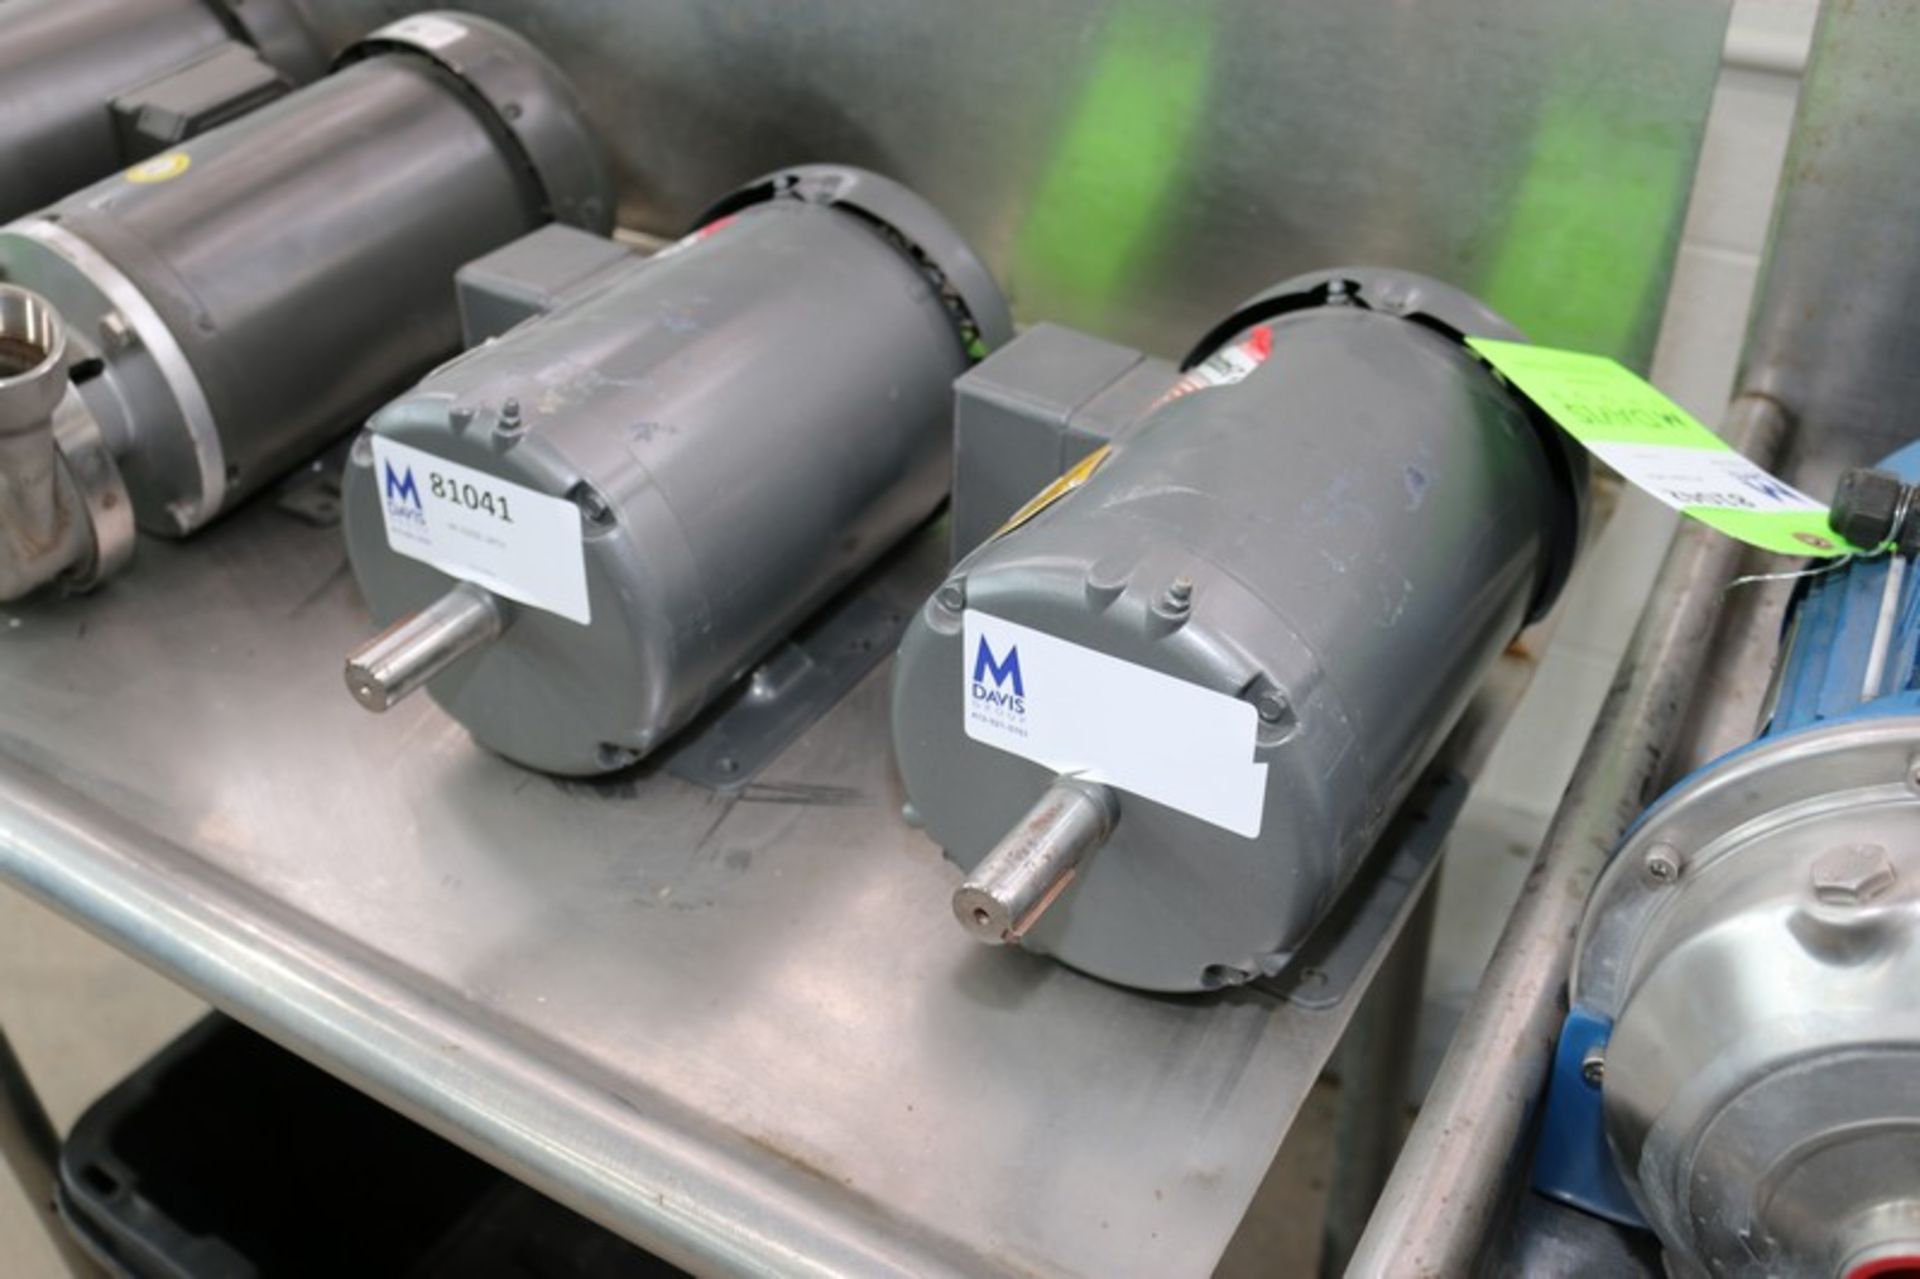 (2) NEW Baldor 1-1/2 hp Motors, 230/460 Volts, 3 Phase, 1740 RPM (INV#81041)(Located @ the MDG - Image 2 of 5